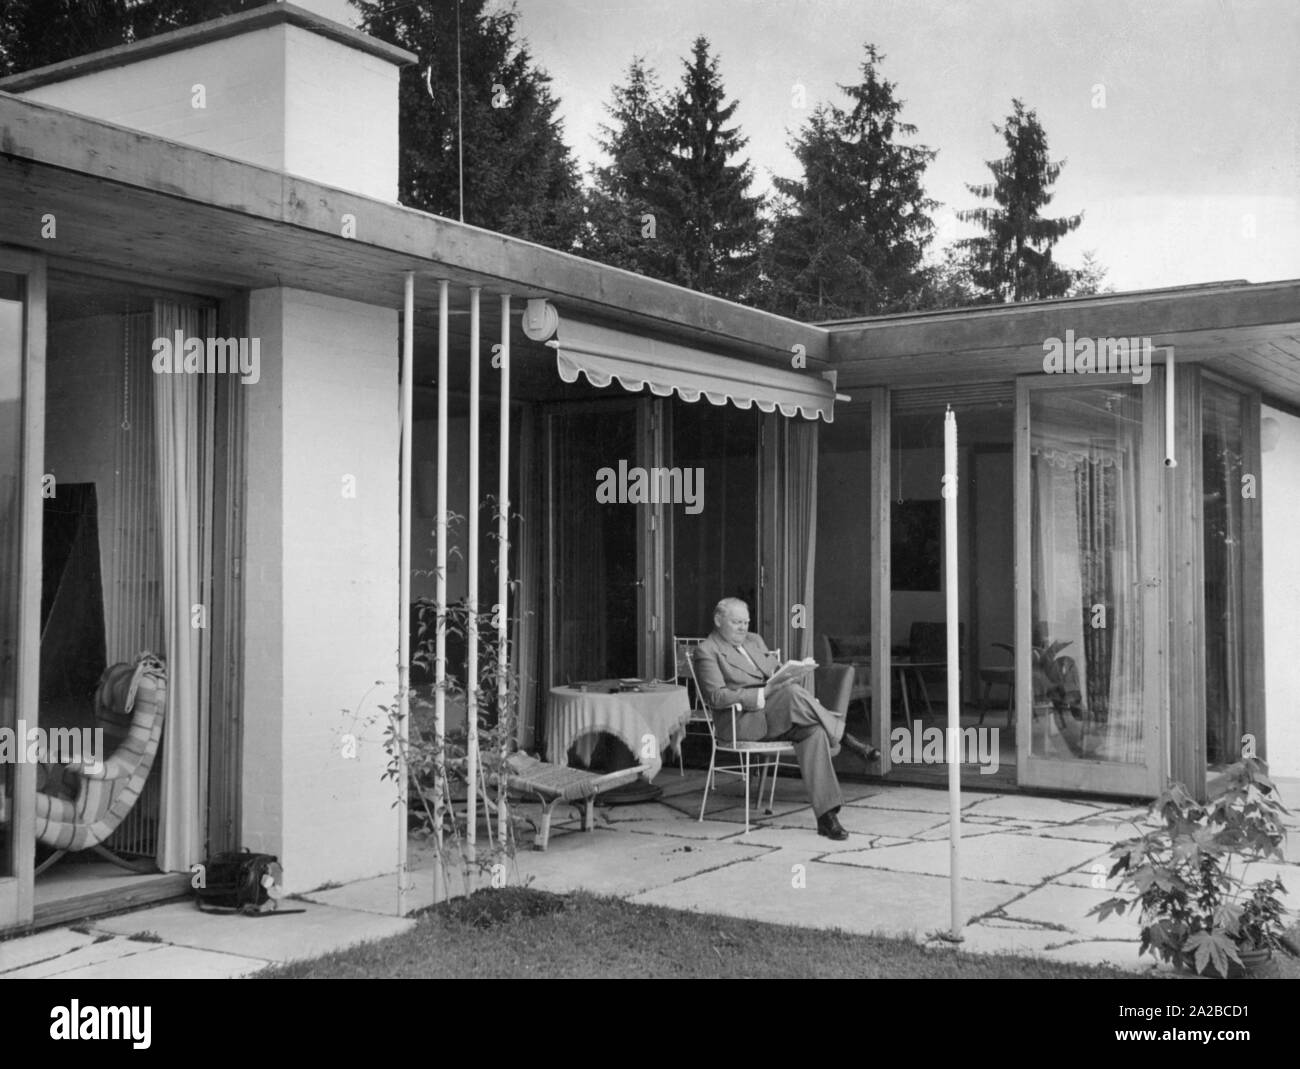 Federal Minister of Economics Ludwig Erhard privately on the terrace of his house in Gmund am Tegernsee (architect: Sep Ruf). Undated photo. Copyright Notice: Max Scheler / SZ Photo. Stock Photo